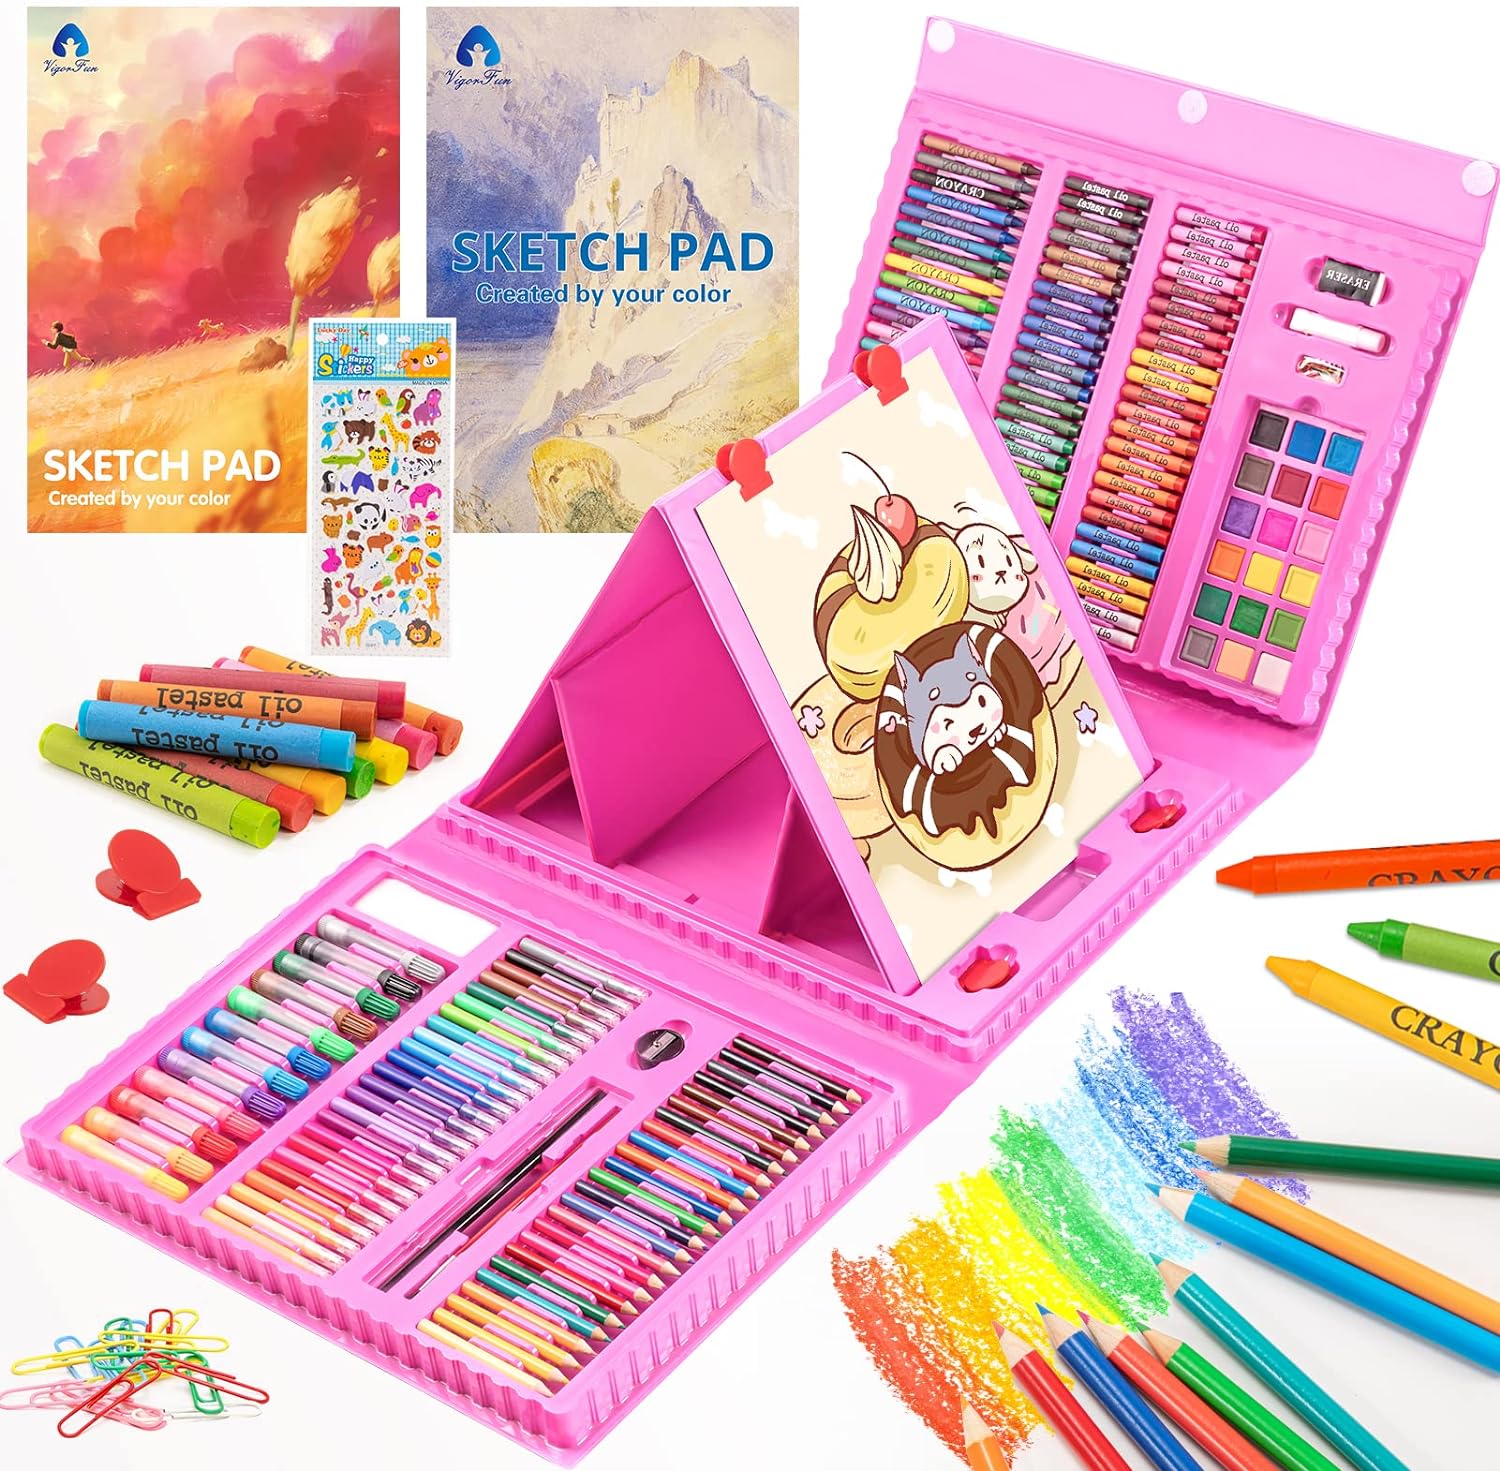 VigorFun Art Supplies, 240-Piece Drawing Art Kit, Gifts for Girls Boys Teens, Art Set Crafts Case with Double Sided Trifold Easel, Includes Sketch Pads, Oil Pastels, Crayons, Colored Pencils (Pink)